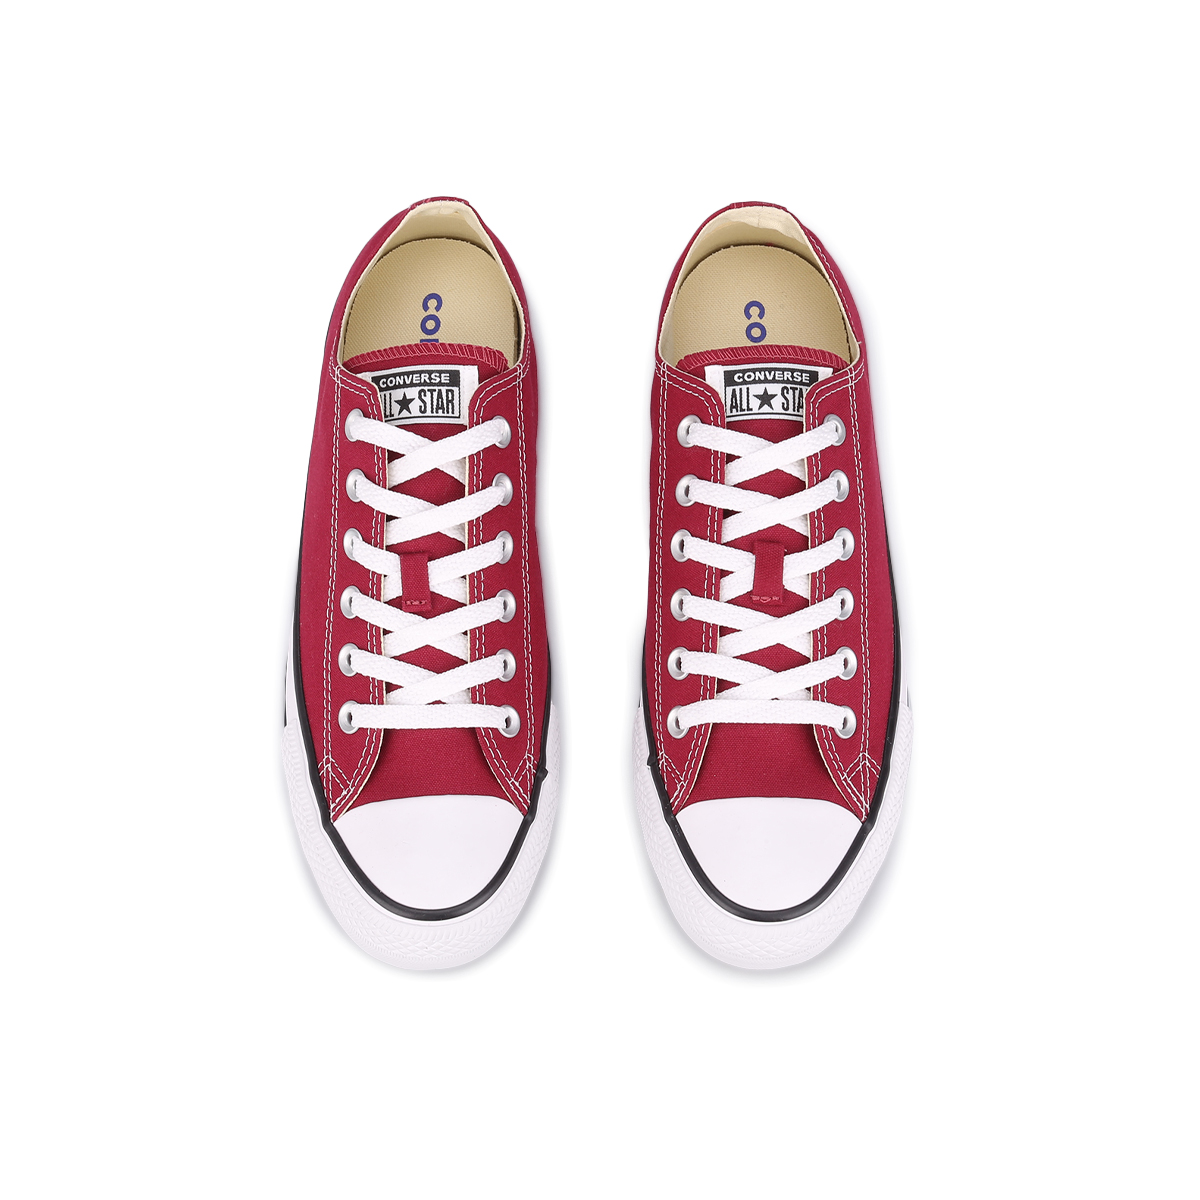 Zapatillas Converse Chuck Taylor All Star Core Ox,  image number null